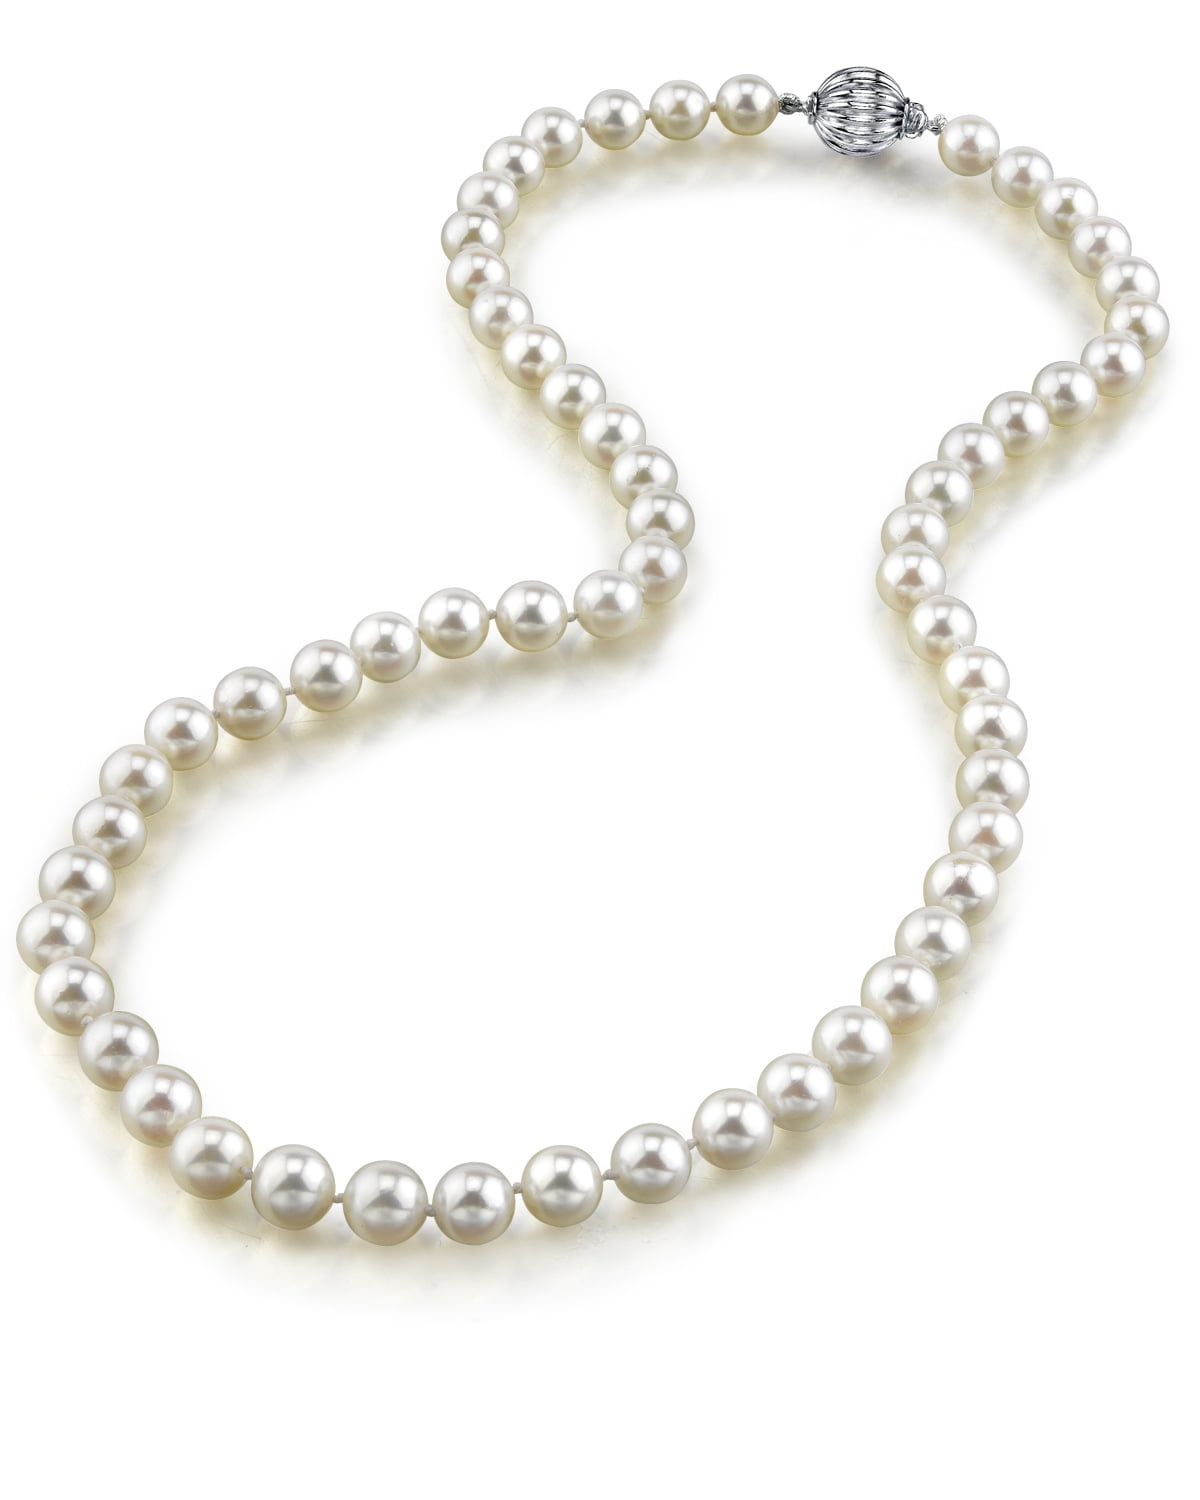 THE PEARL SOURCE 14K Gold 6.5-7.0mm Round Genuine Black Japanese Akoya Saltwater Cultured Pearl Necklace in 17 Princess Length for Women 